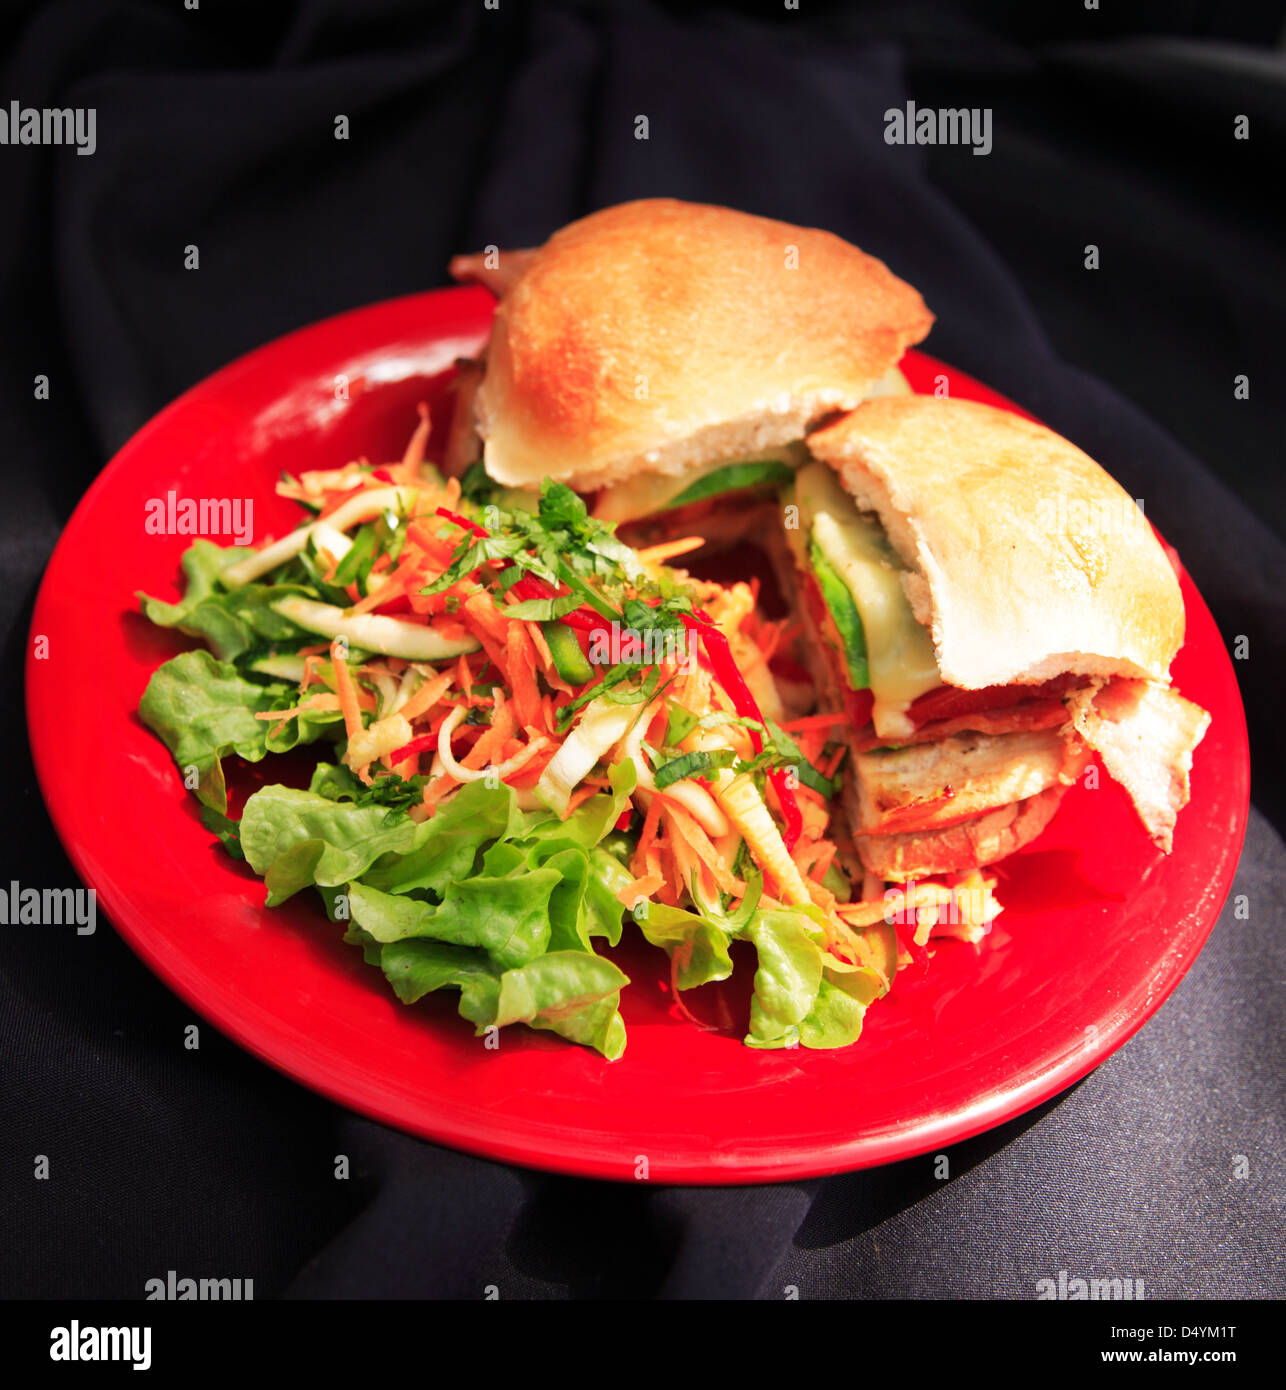 Ham and cheese sandwich with salad Stock Photo